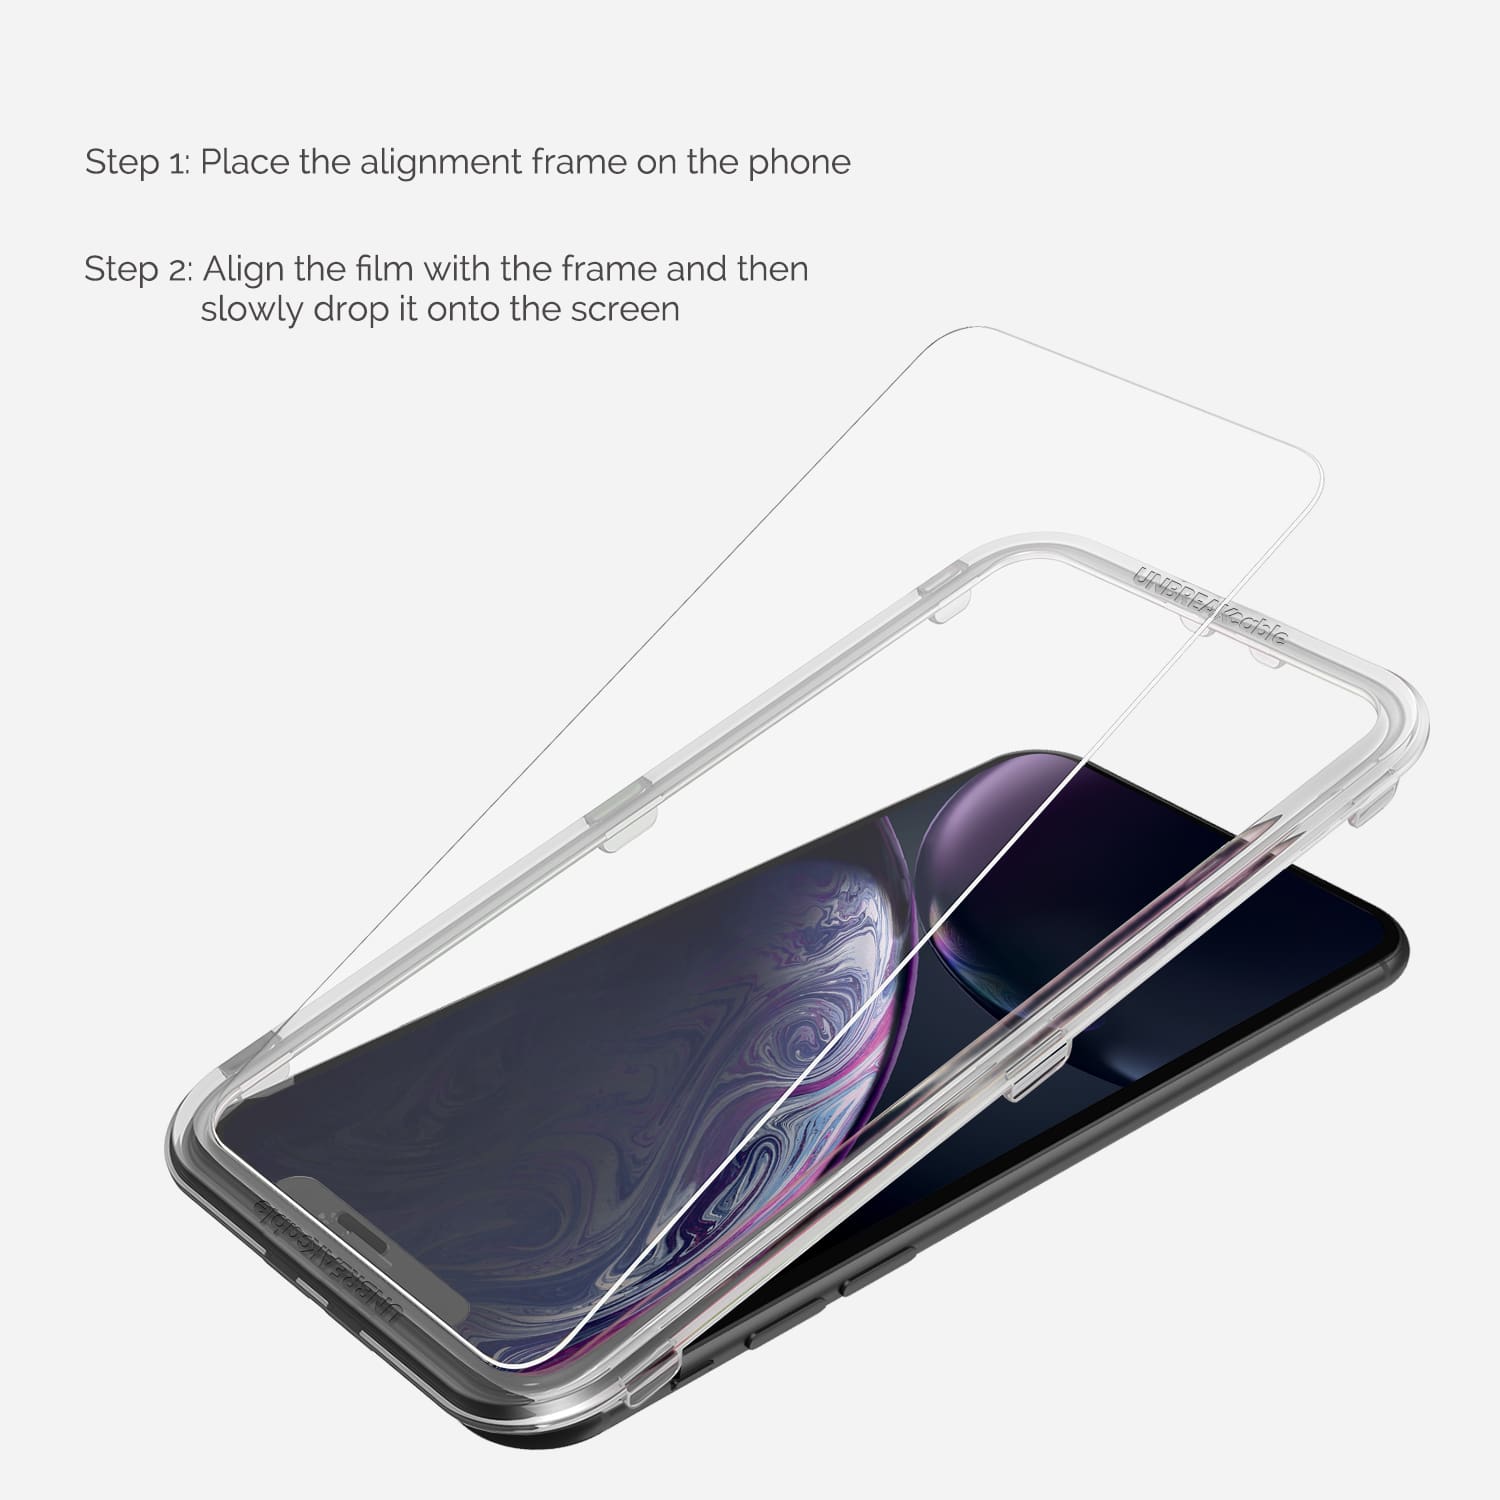 UNBREAKcable Compatible with iPhone XR Screen Protector, iPhone 11 Screen Protector 3-Pack 6.1 inch, 9H Premium Tempered Glass Screen Protector for